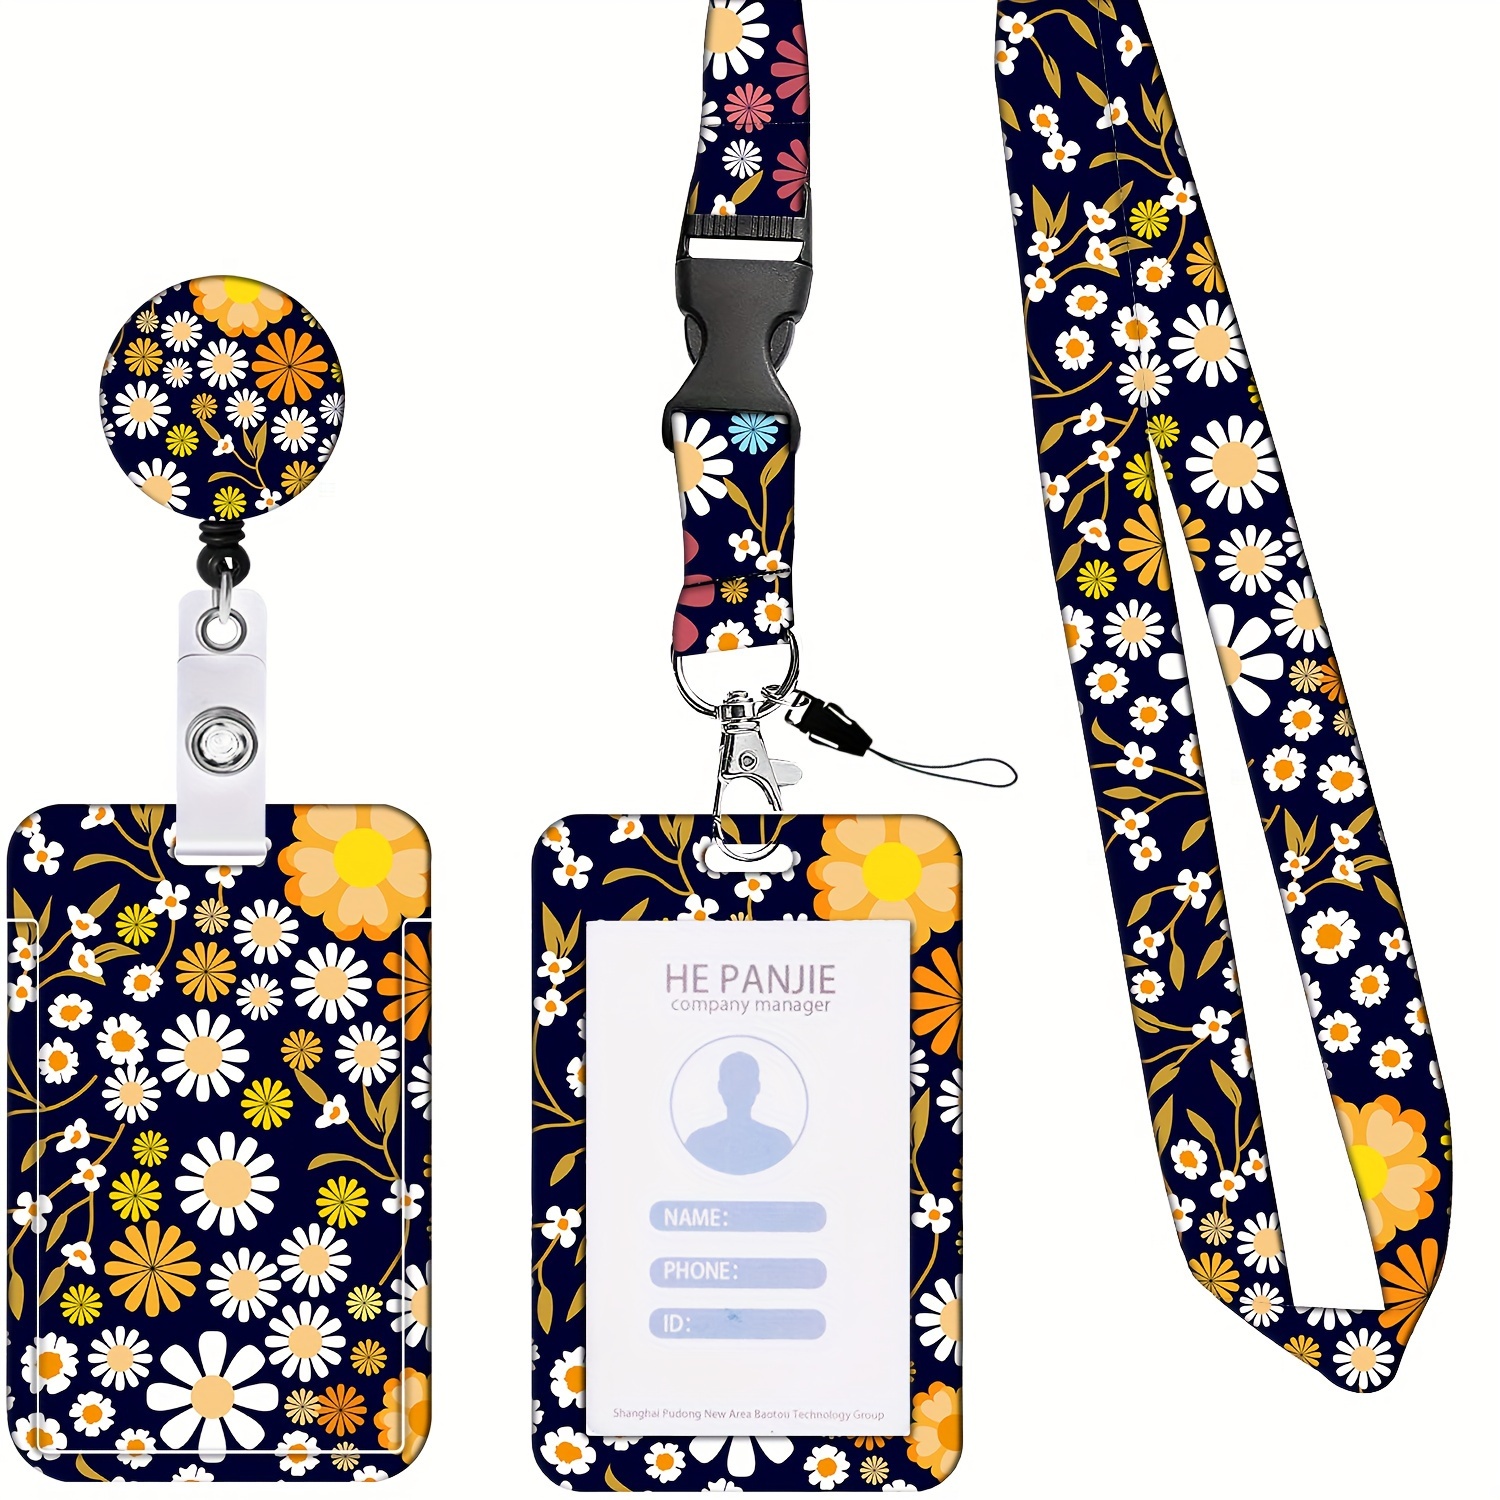  Teacher Badge Holder with Retractable Lanyard, Flower Lanyards  for ID Badges Name Tags Vertical Card Holder, Breakaway Lanyard Badge Reel  Retractable, Teacher Nurse Workers Women Office Gifts : Office Products